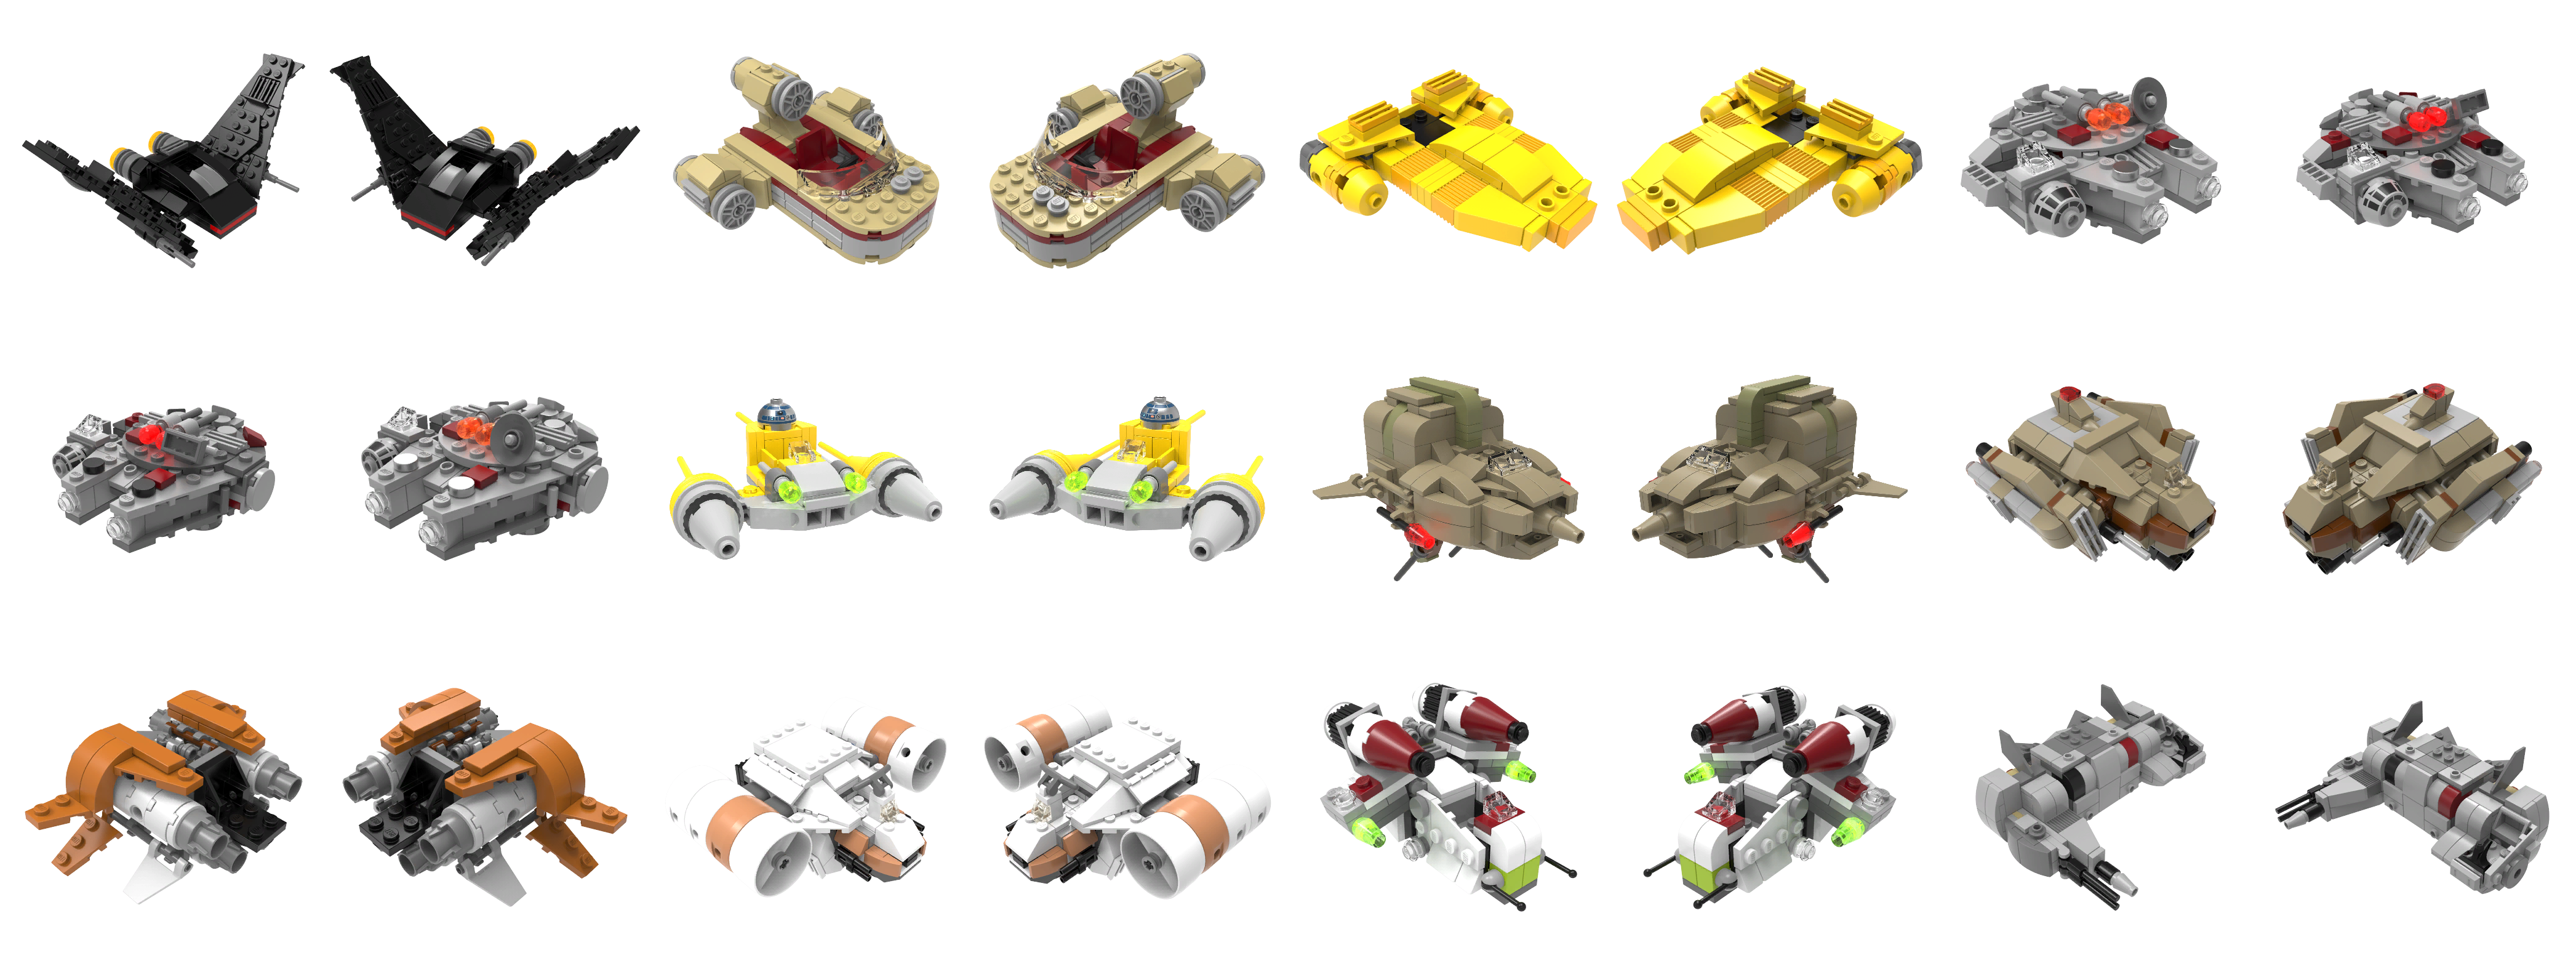 LEGO Star Wars: The Force Awakens - Vehicle Icons (Micro 2)